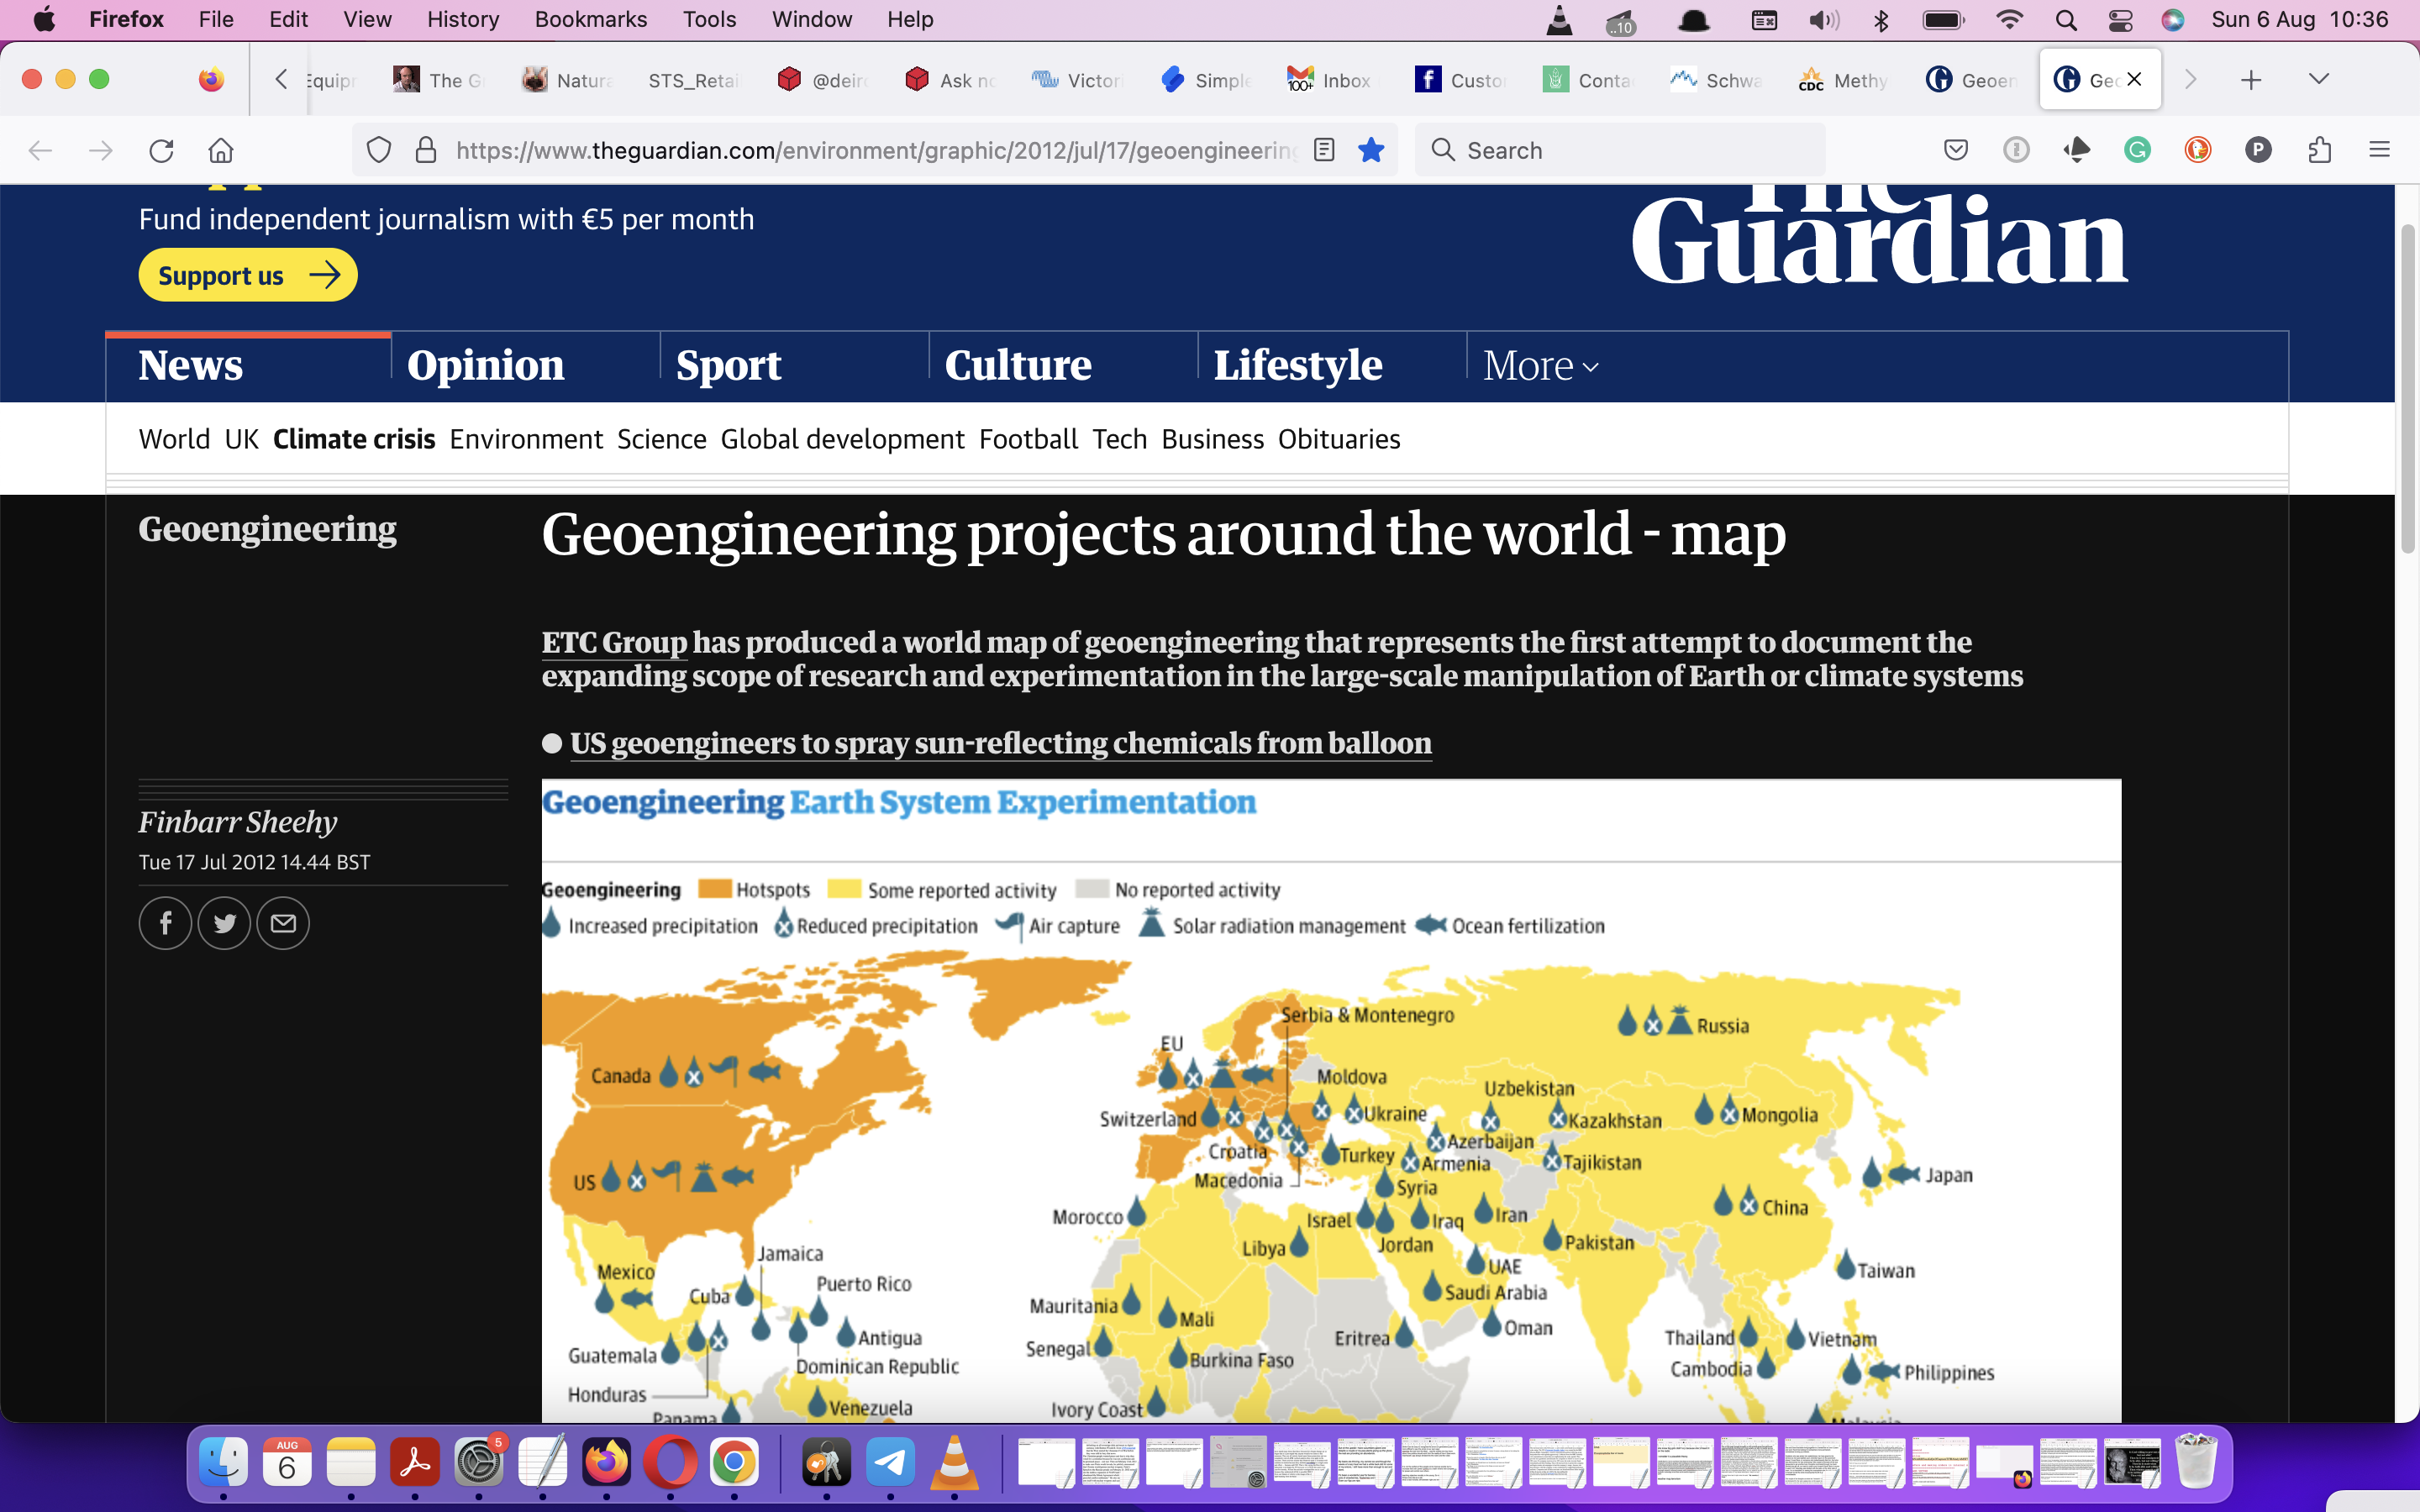 geoengineering projects around the world.png